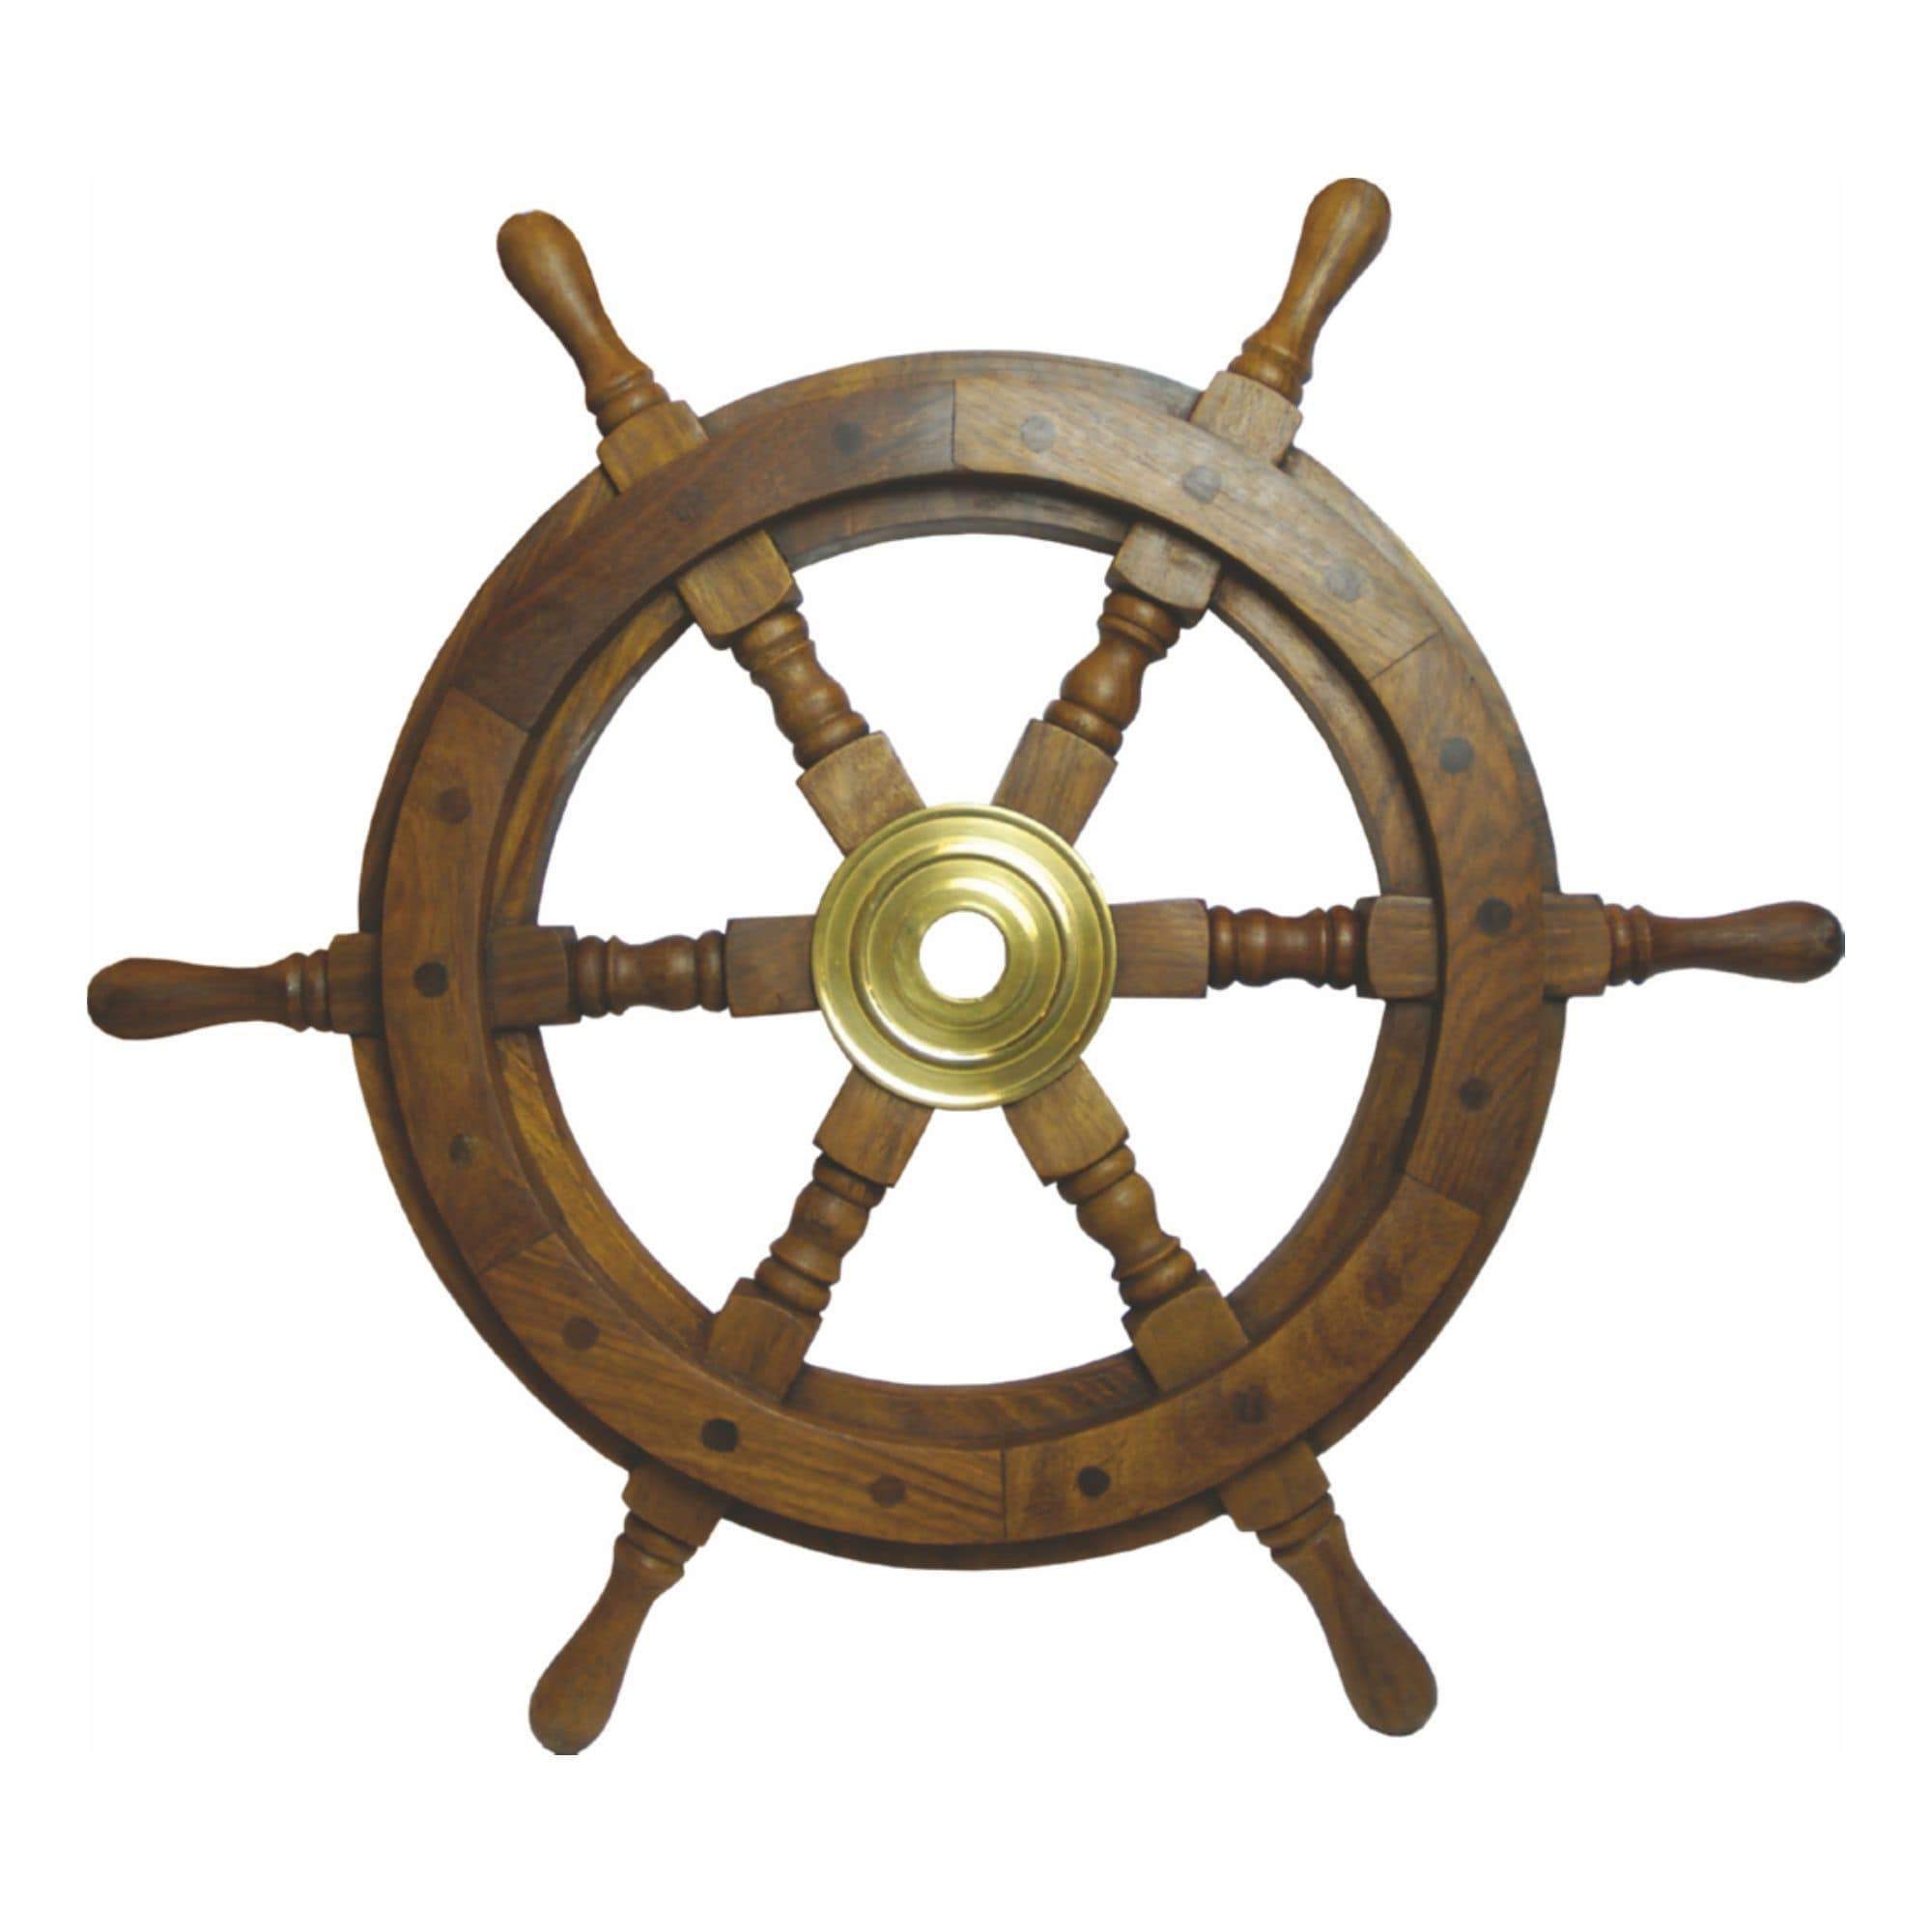 Wooden Ships Wheel – Very Large Size